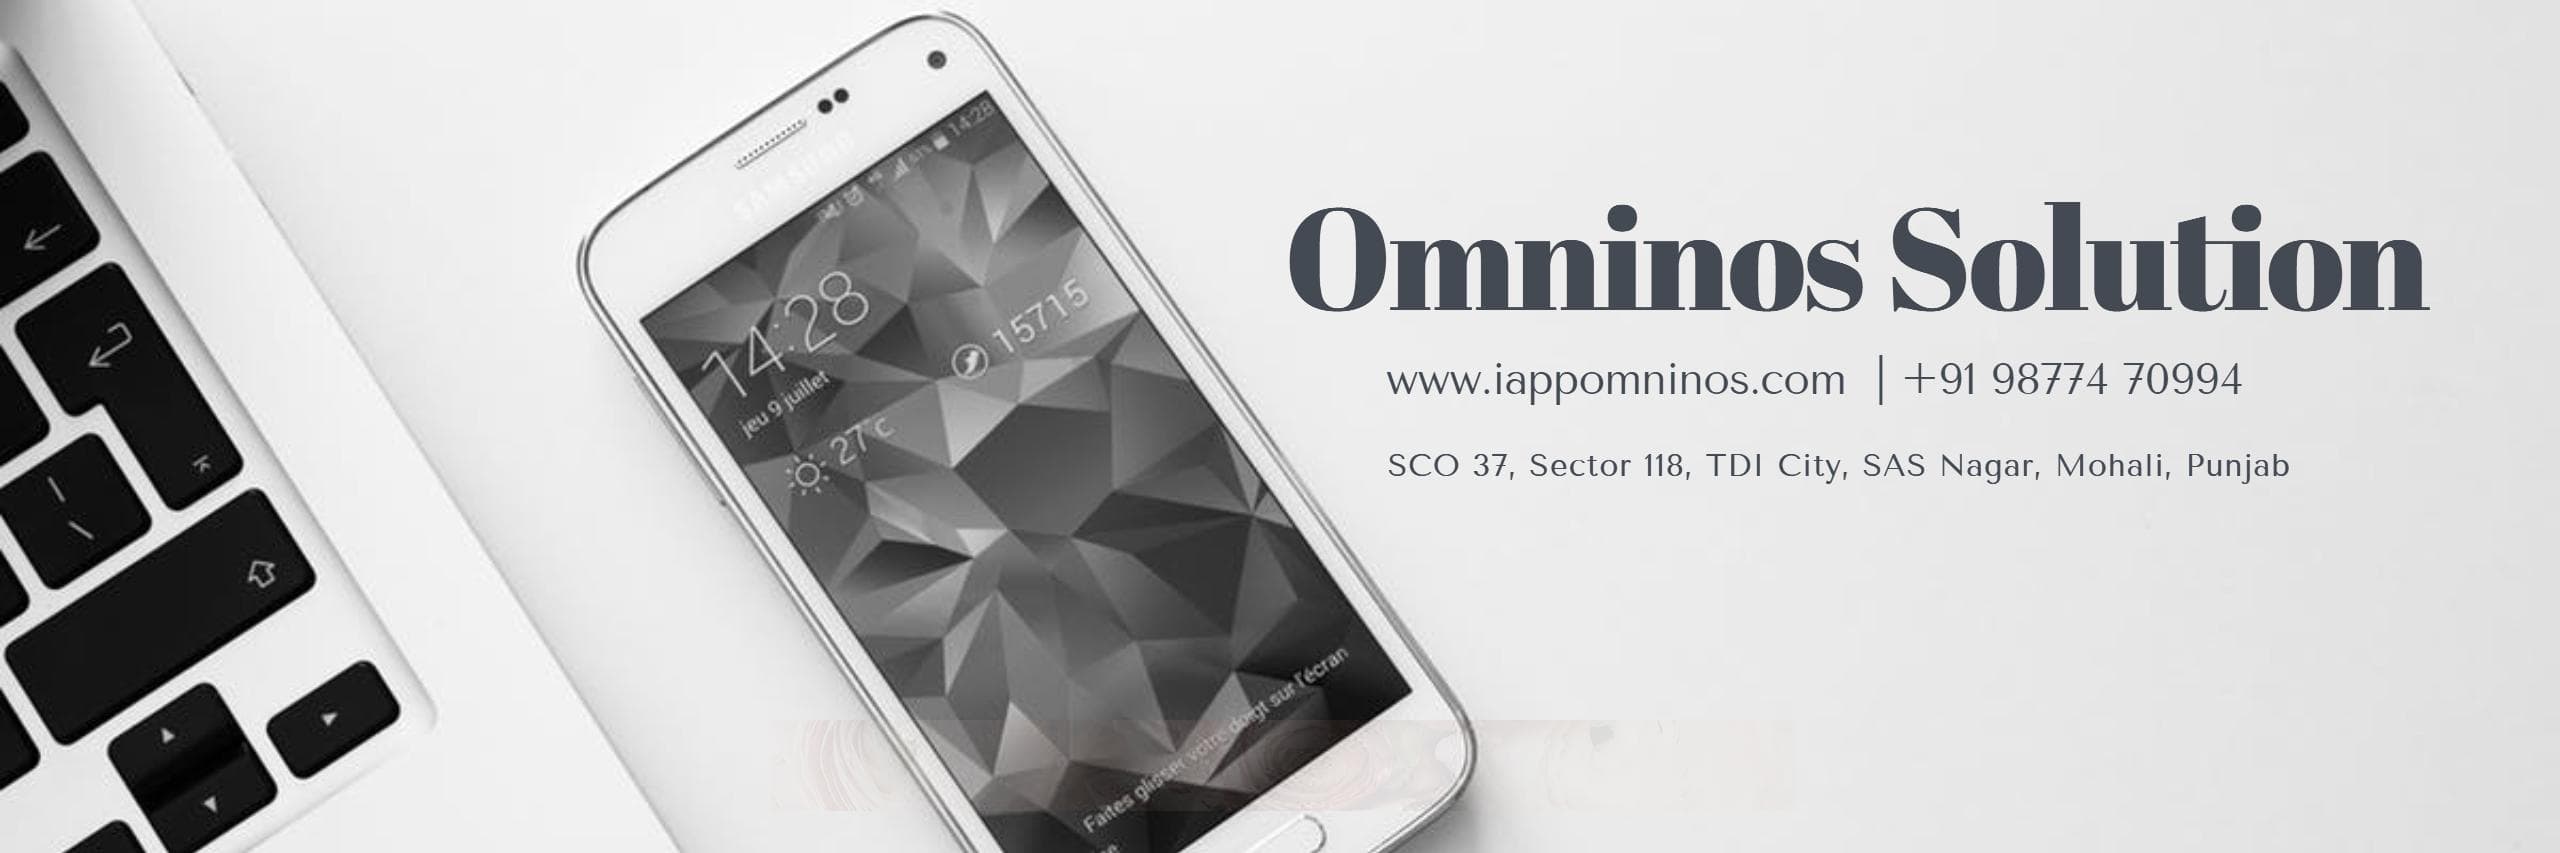 Omninos Technologies International Pvt Ltd cover picture